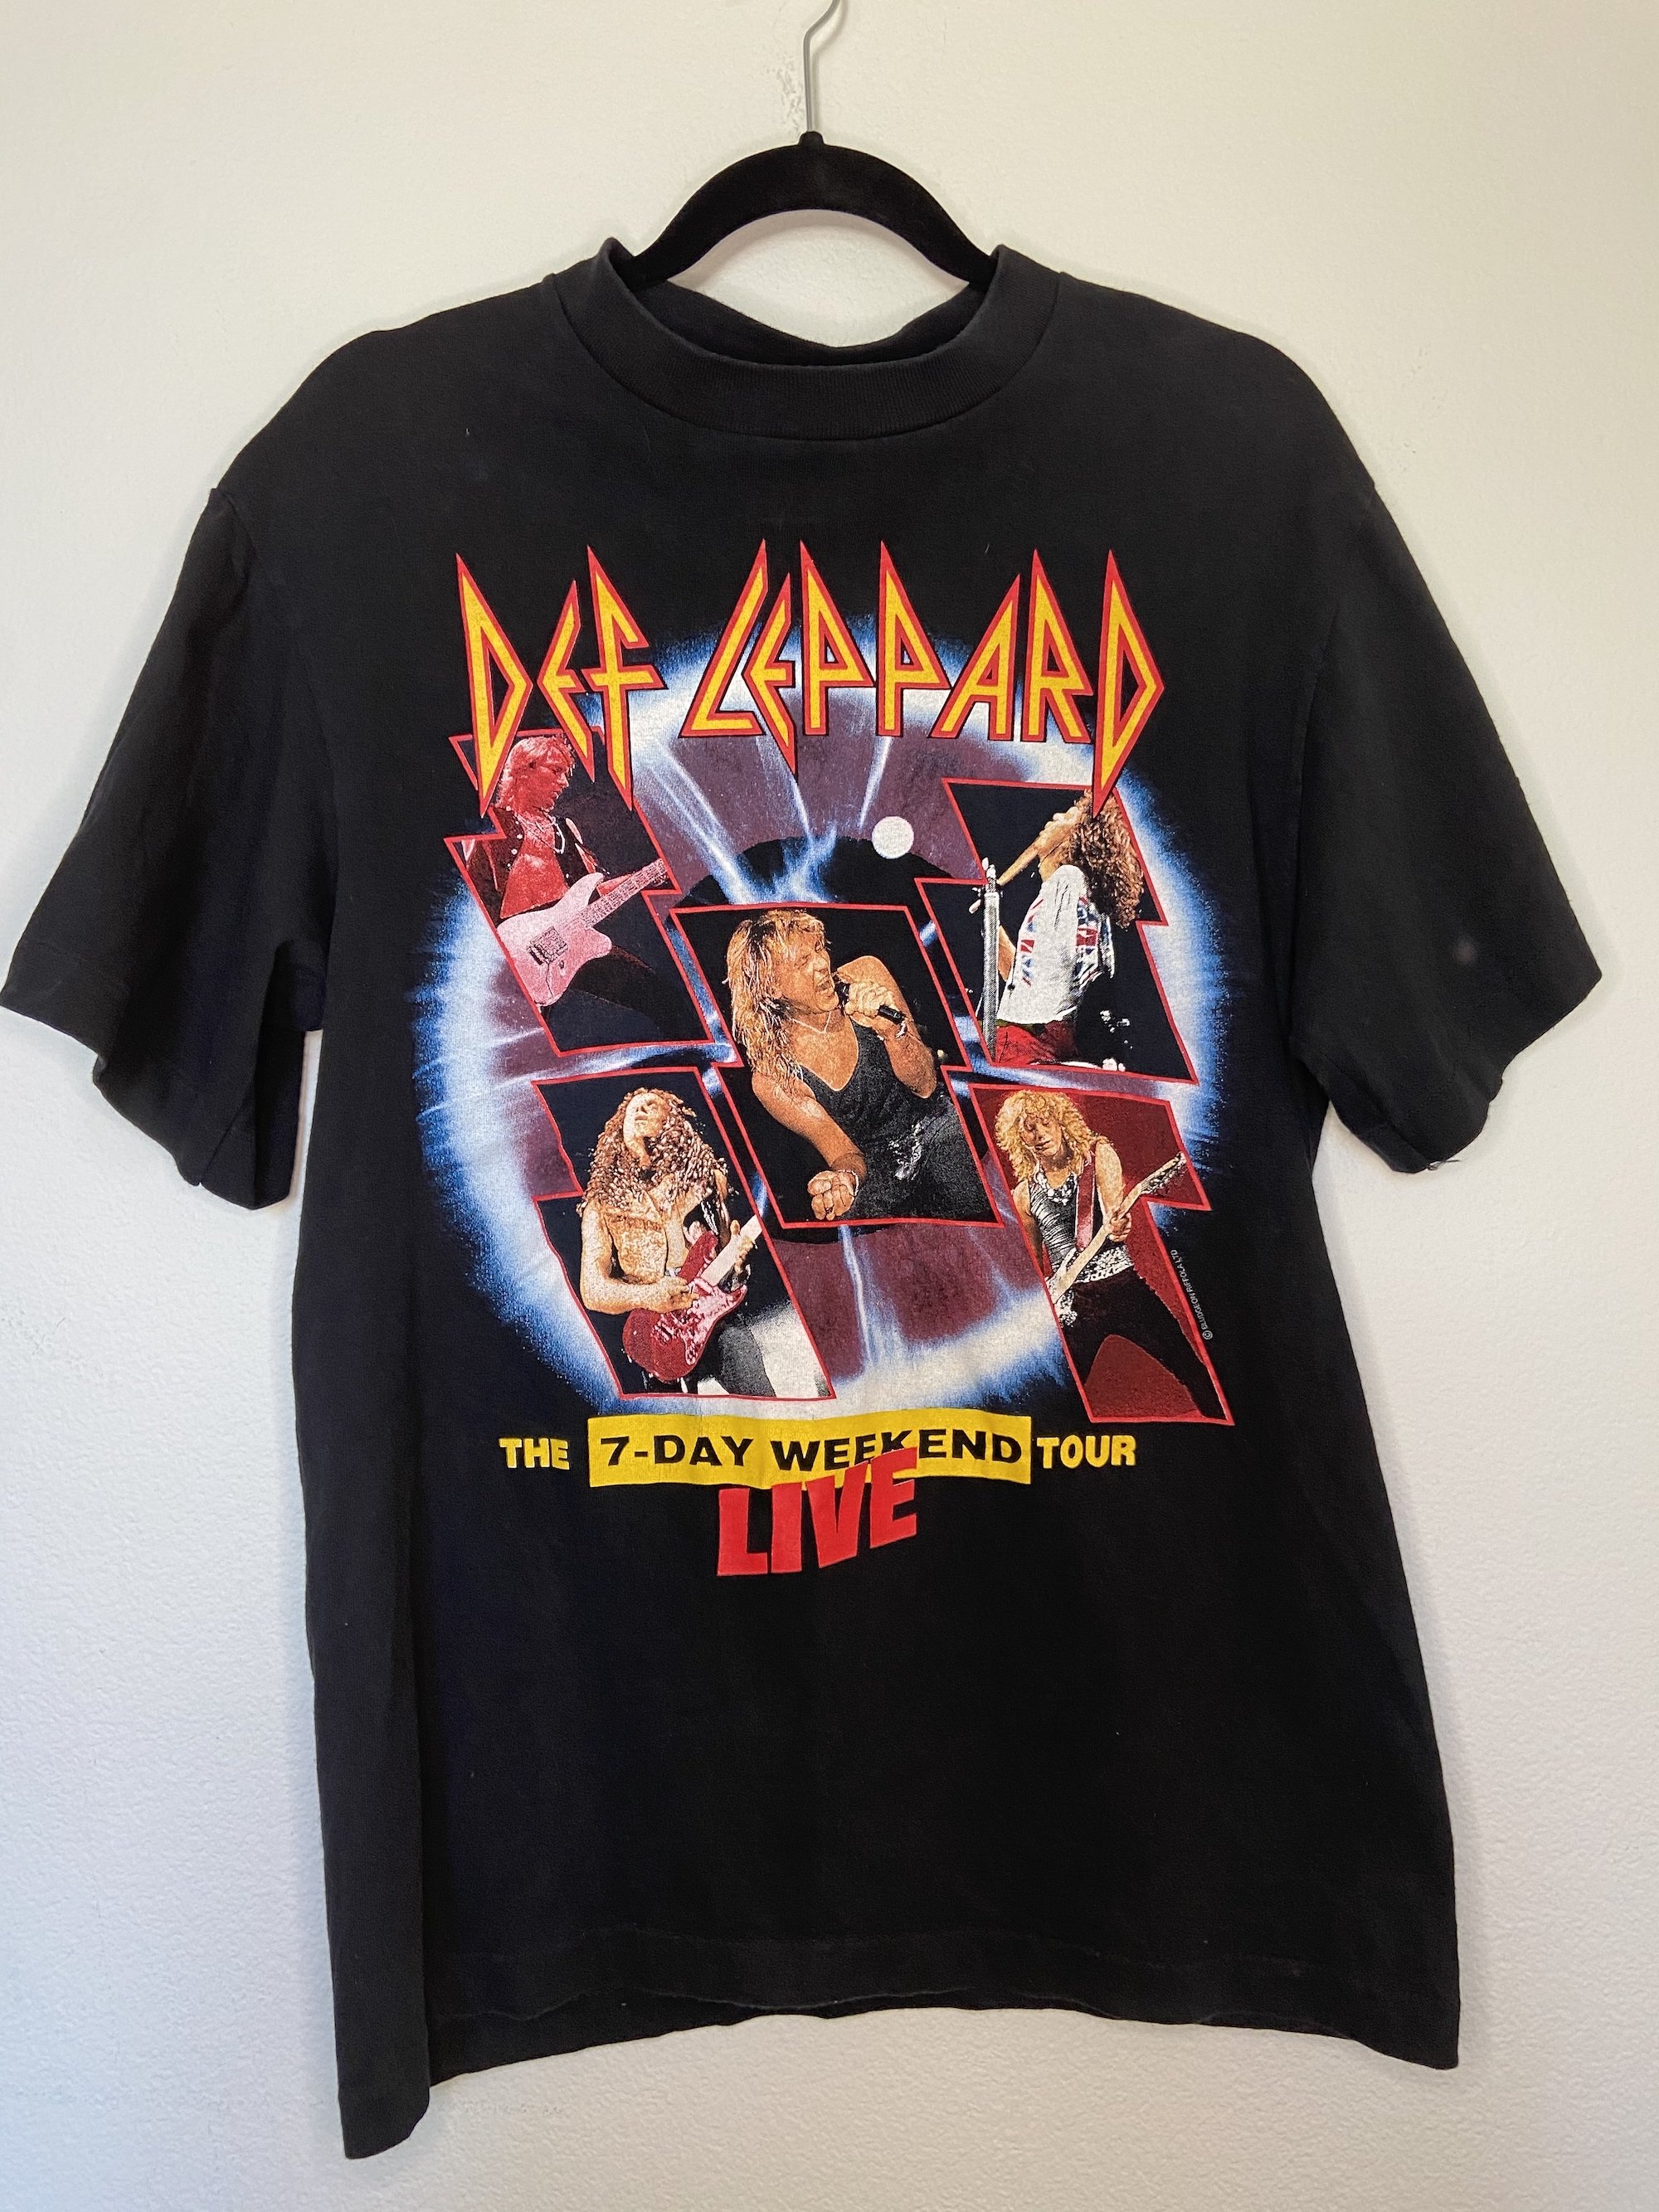 Vintage 1993 Def Leppard 7-Day Weekend Tour Live T-Shirt — DEAD PEOPLE'S SHIT